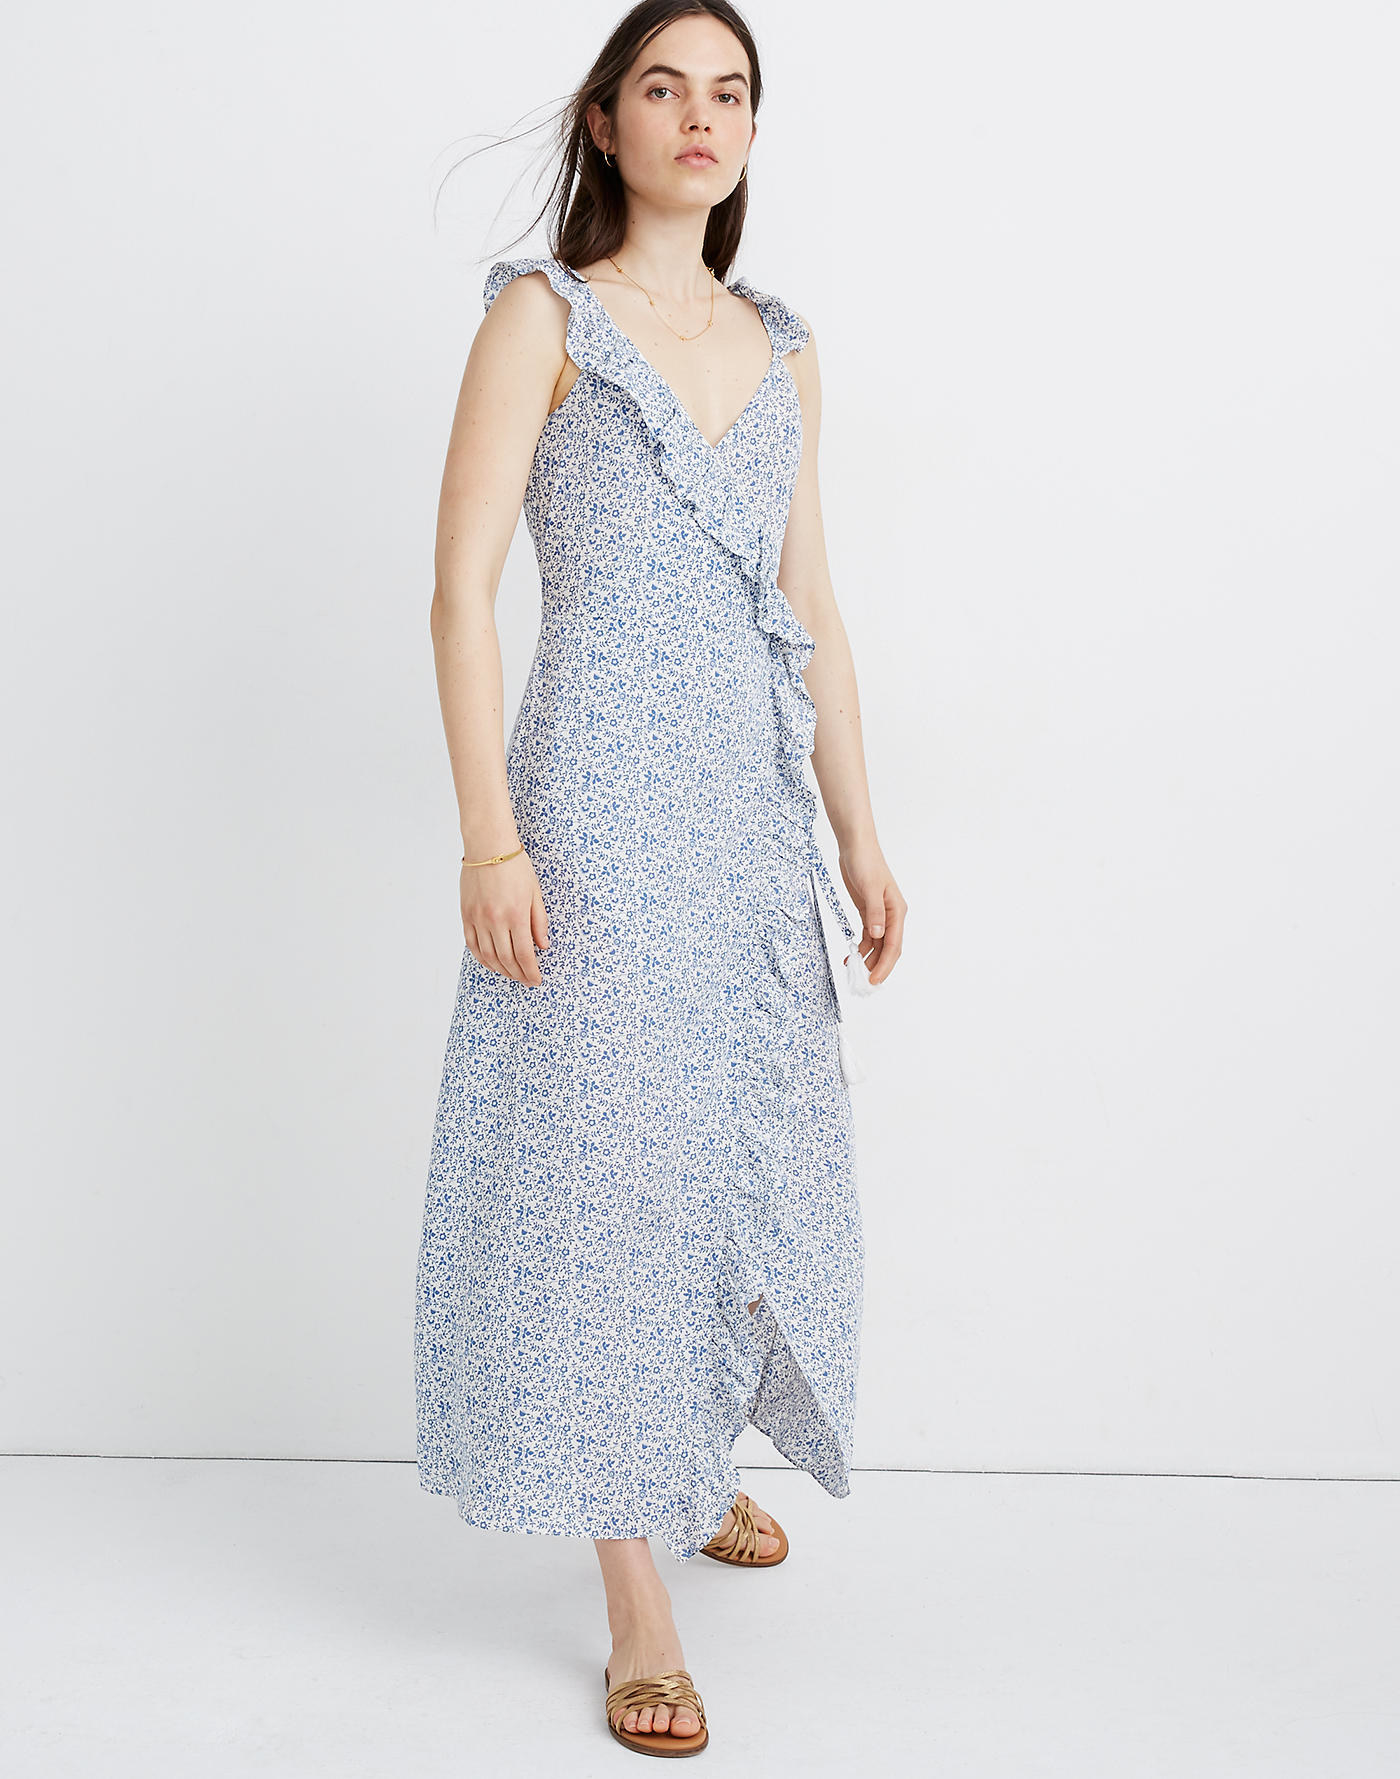 model wear the blue and white V-neck floral maxi dress